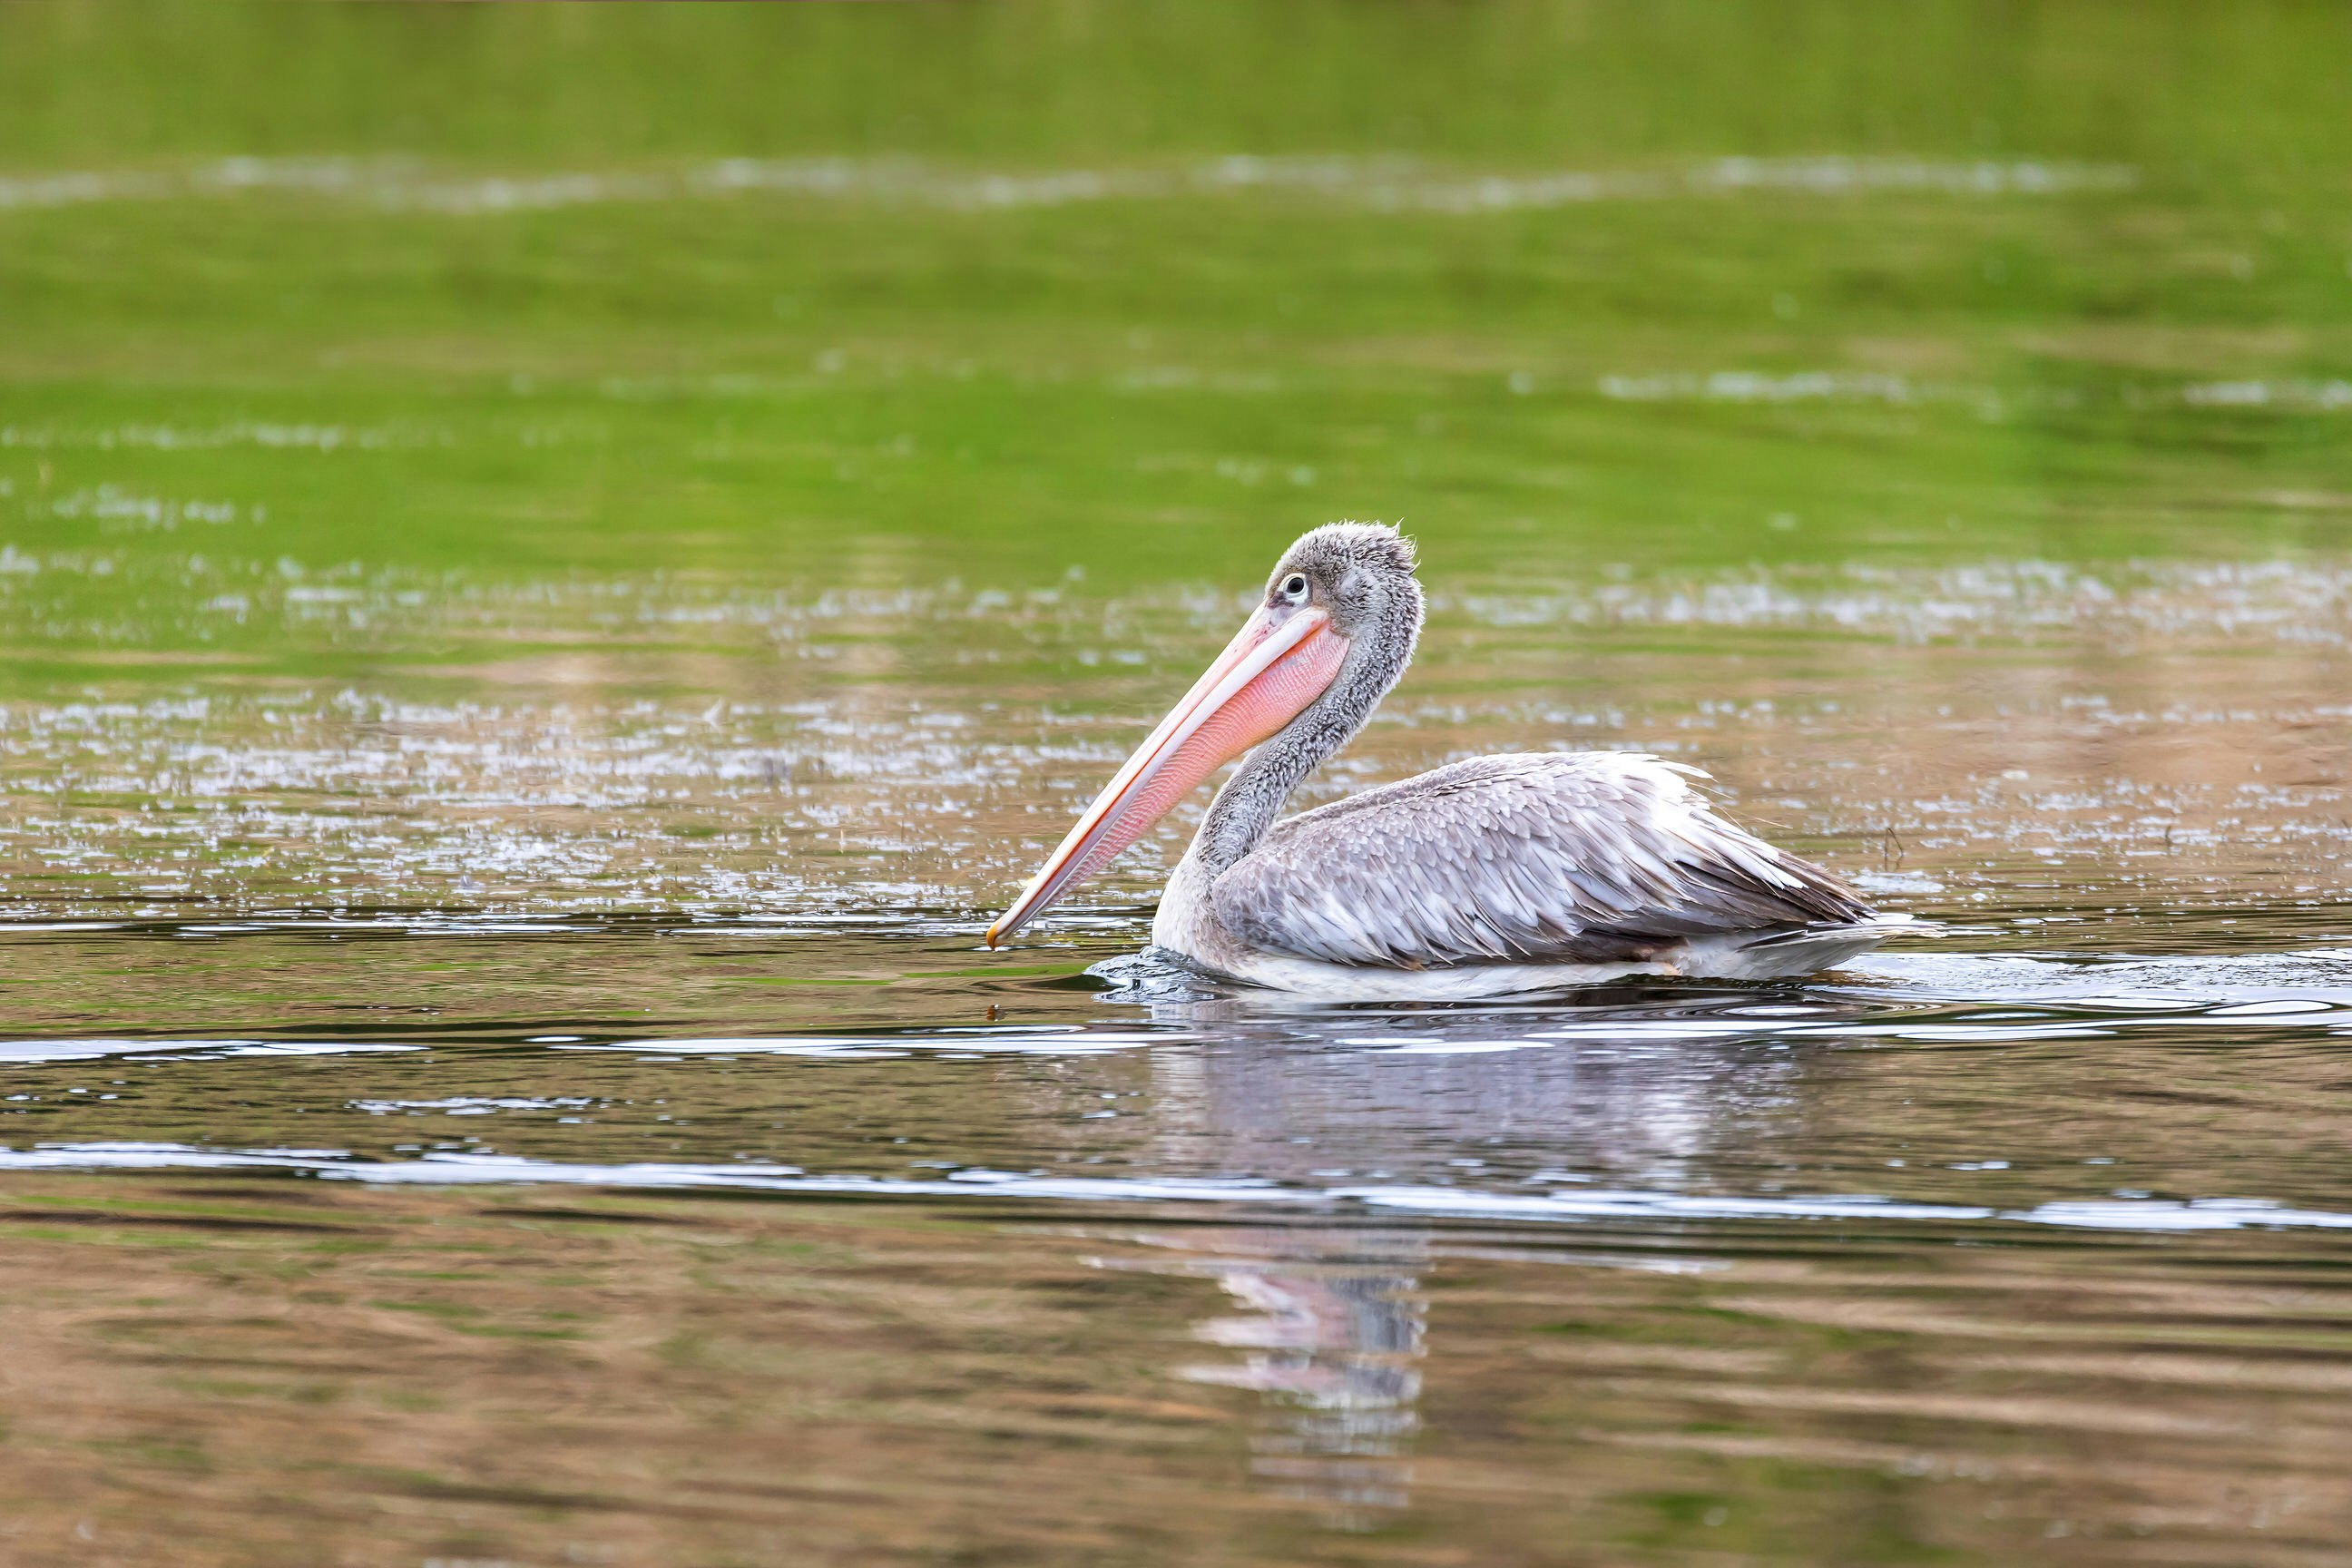 A large grey-feathered pelican, with large pink beak, swims along the water; the water in foreground is almost black, while the section behind the bird is green due to reflections.